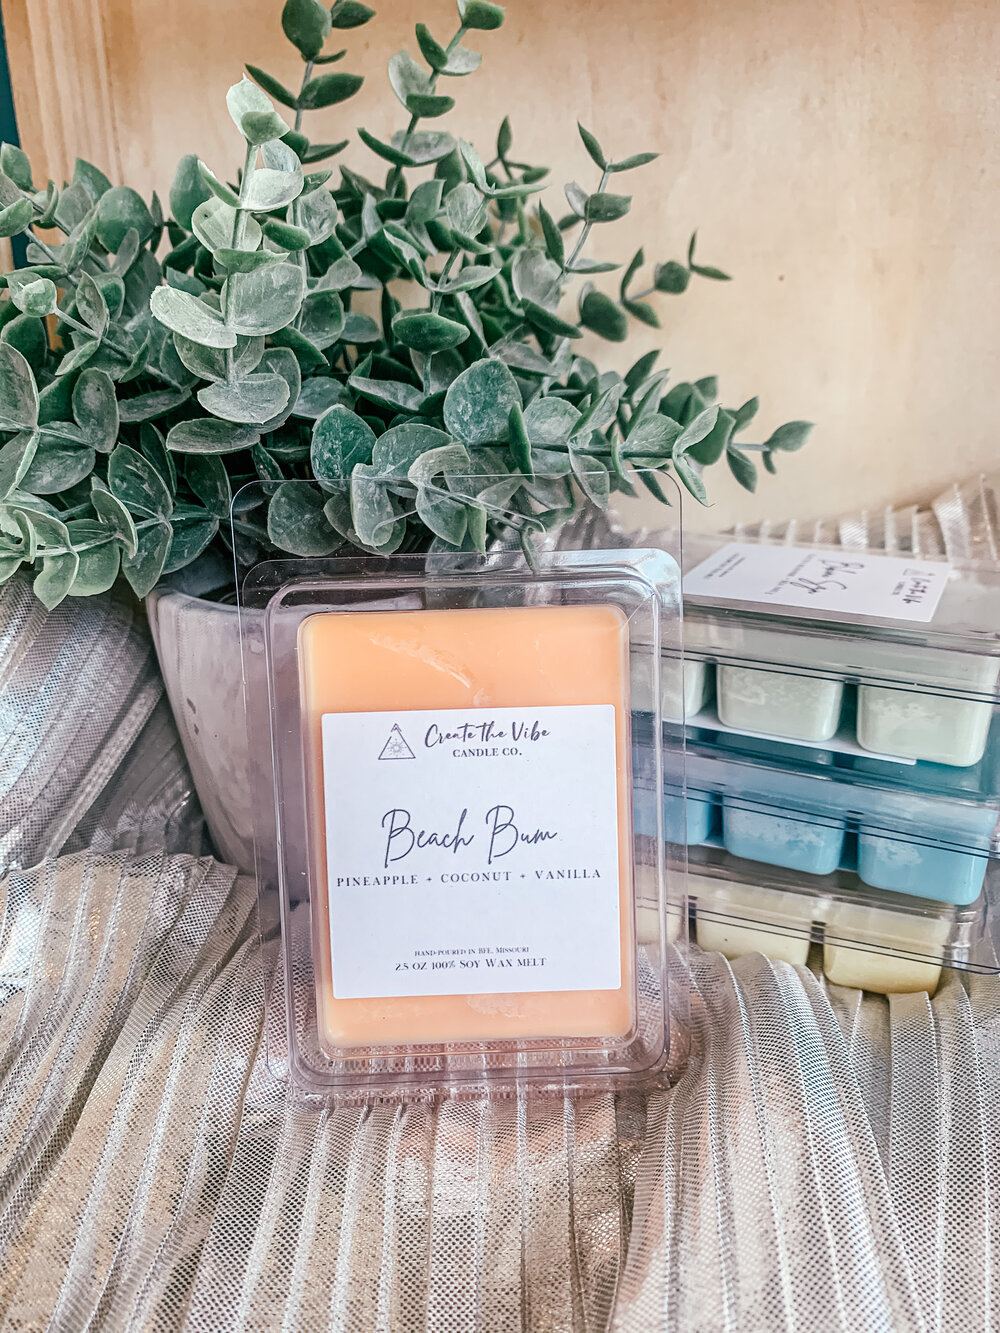 Coconut soy wax melts, Choose your scent